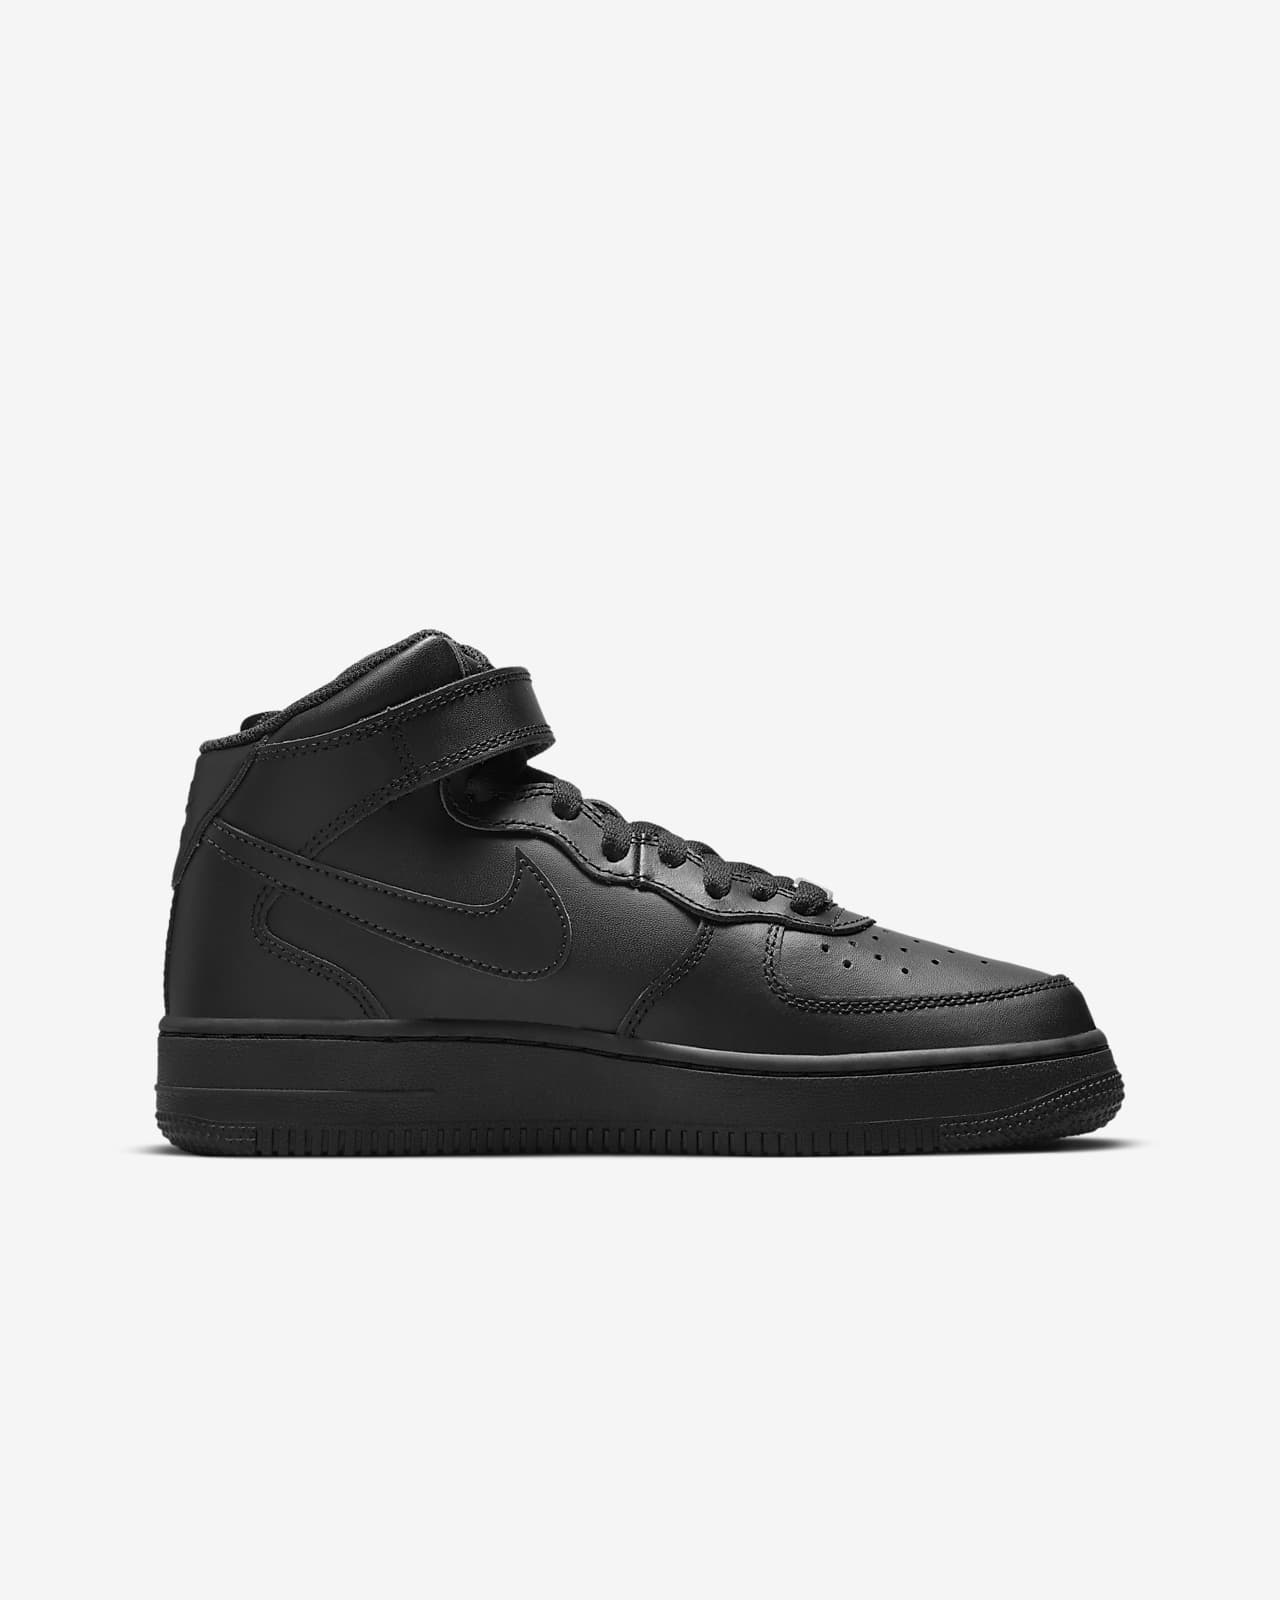 nike air force 1 mid size 6.5